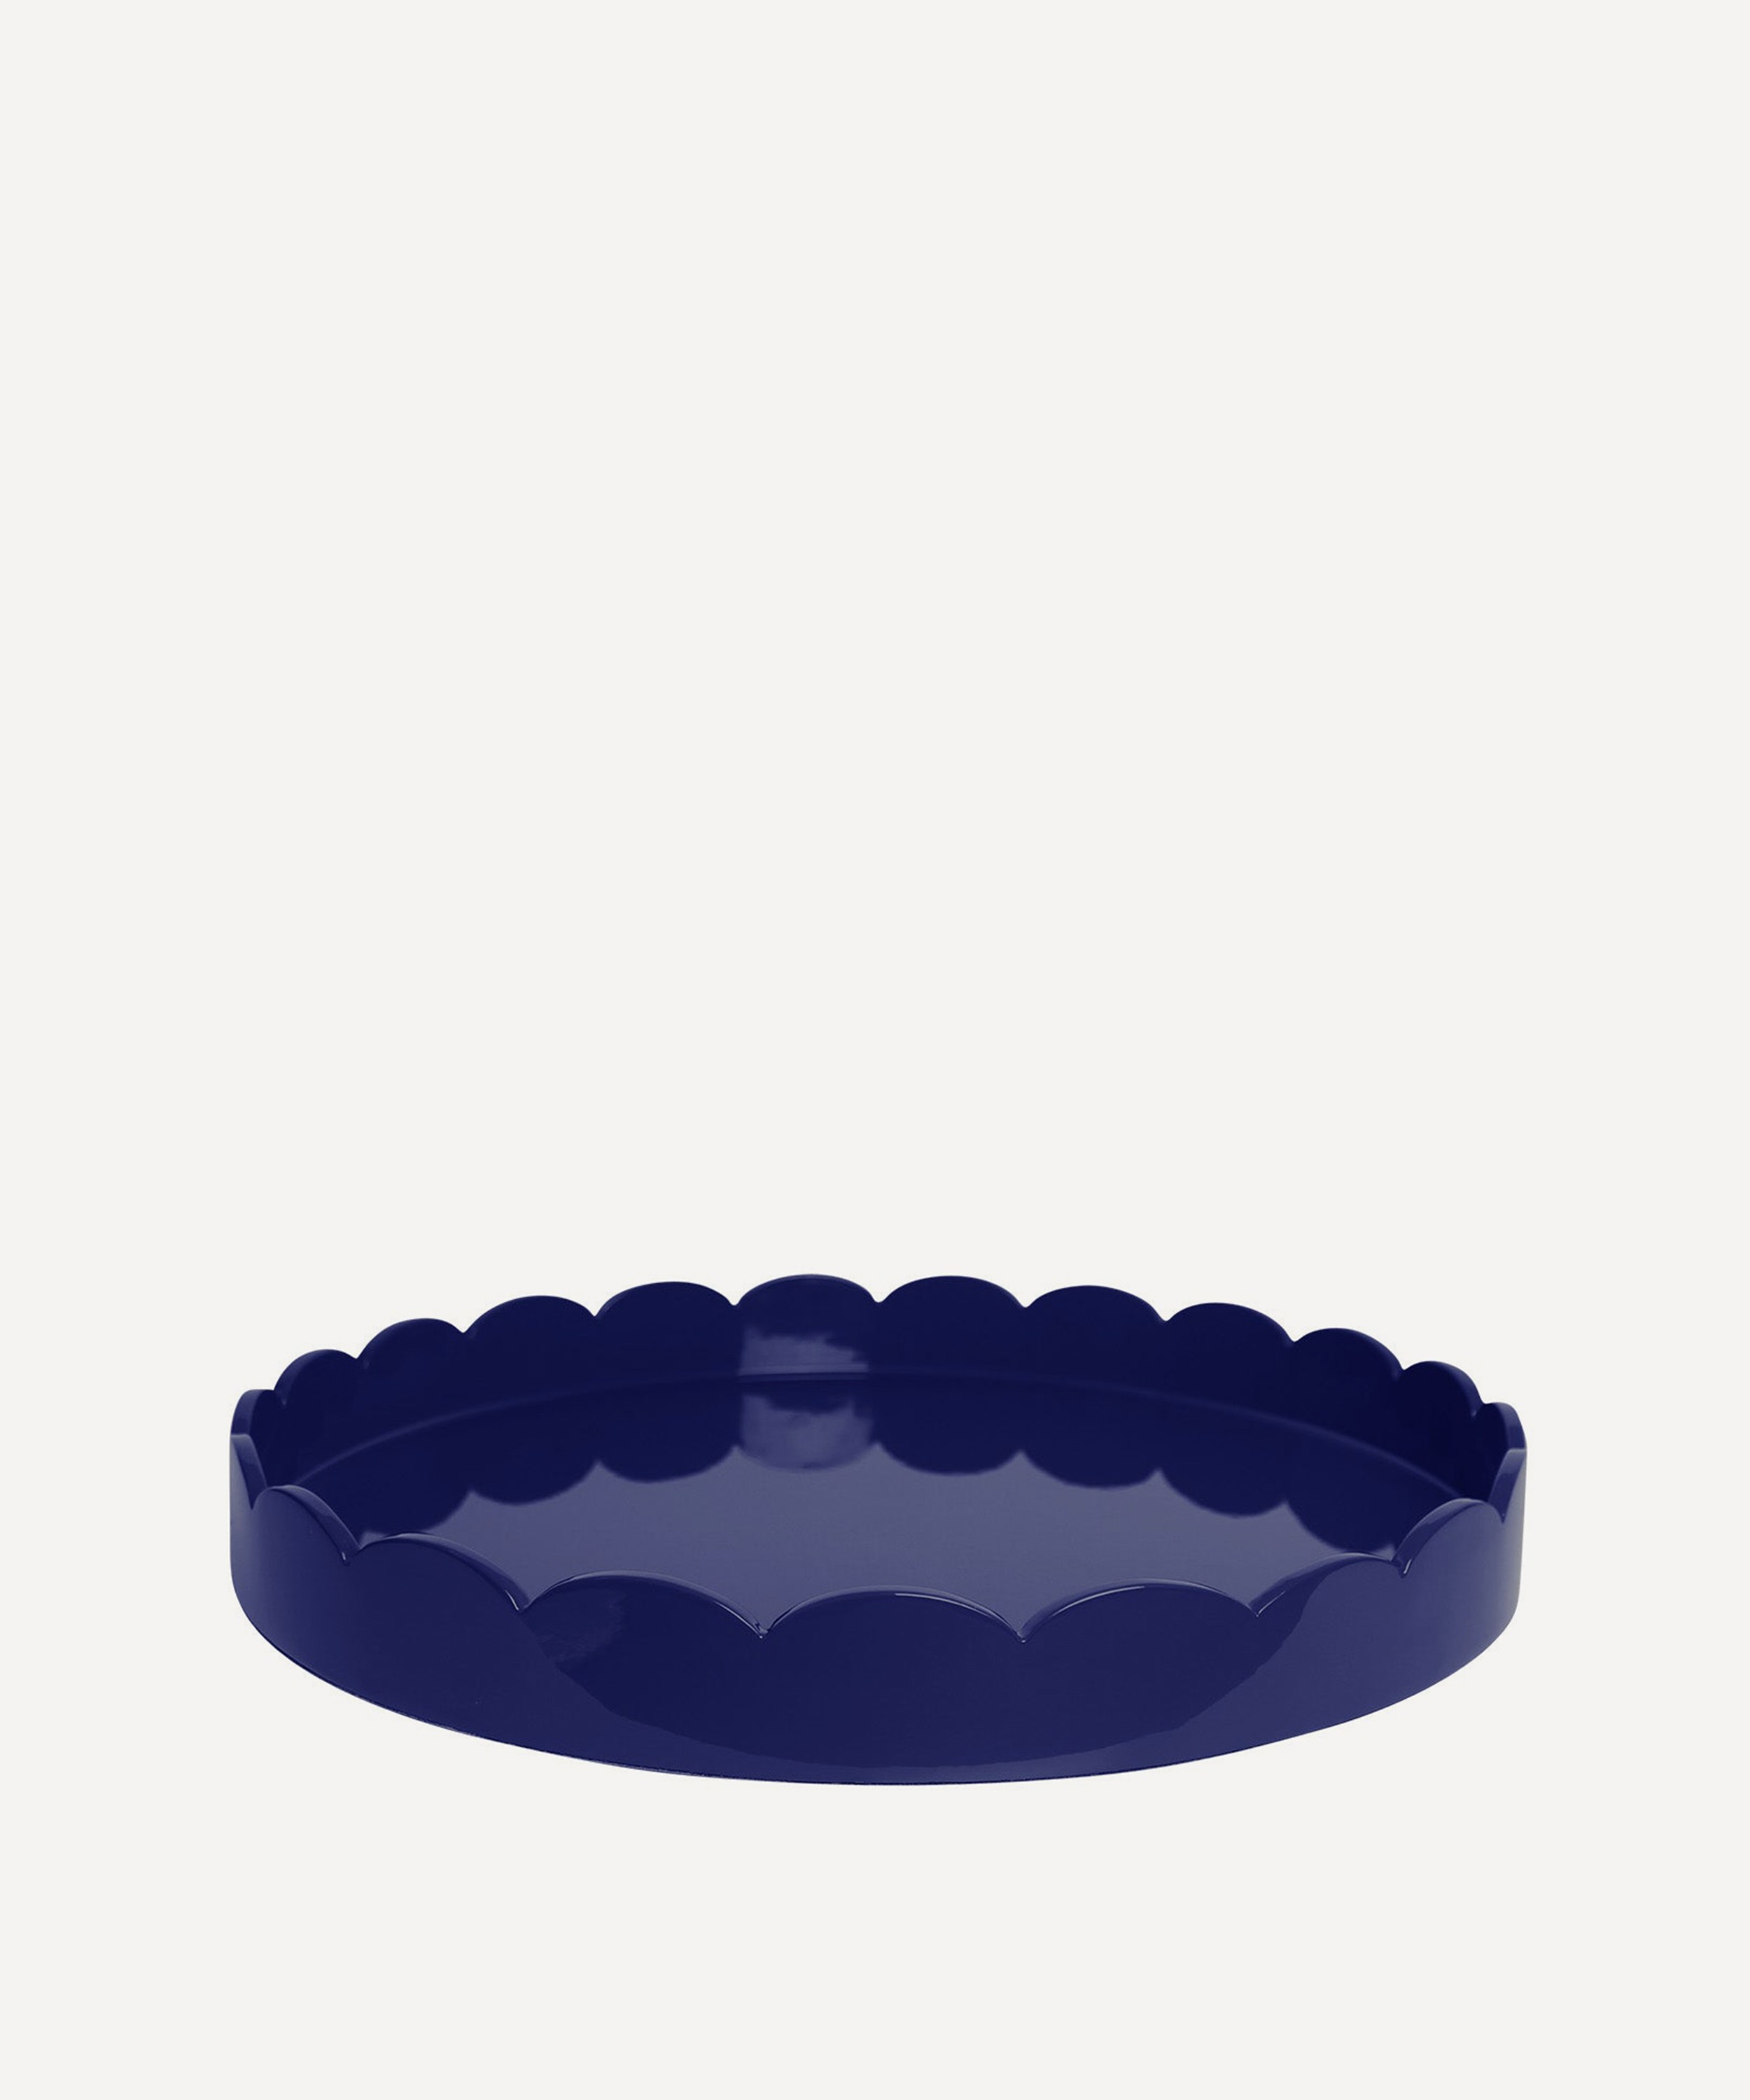 Addison Ross - Large Round Lacquer Scallop Tray